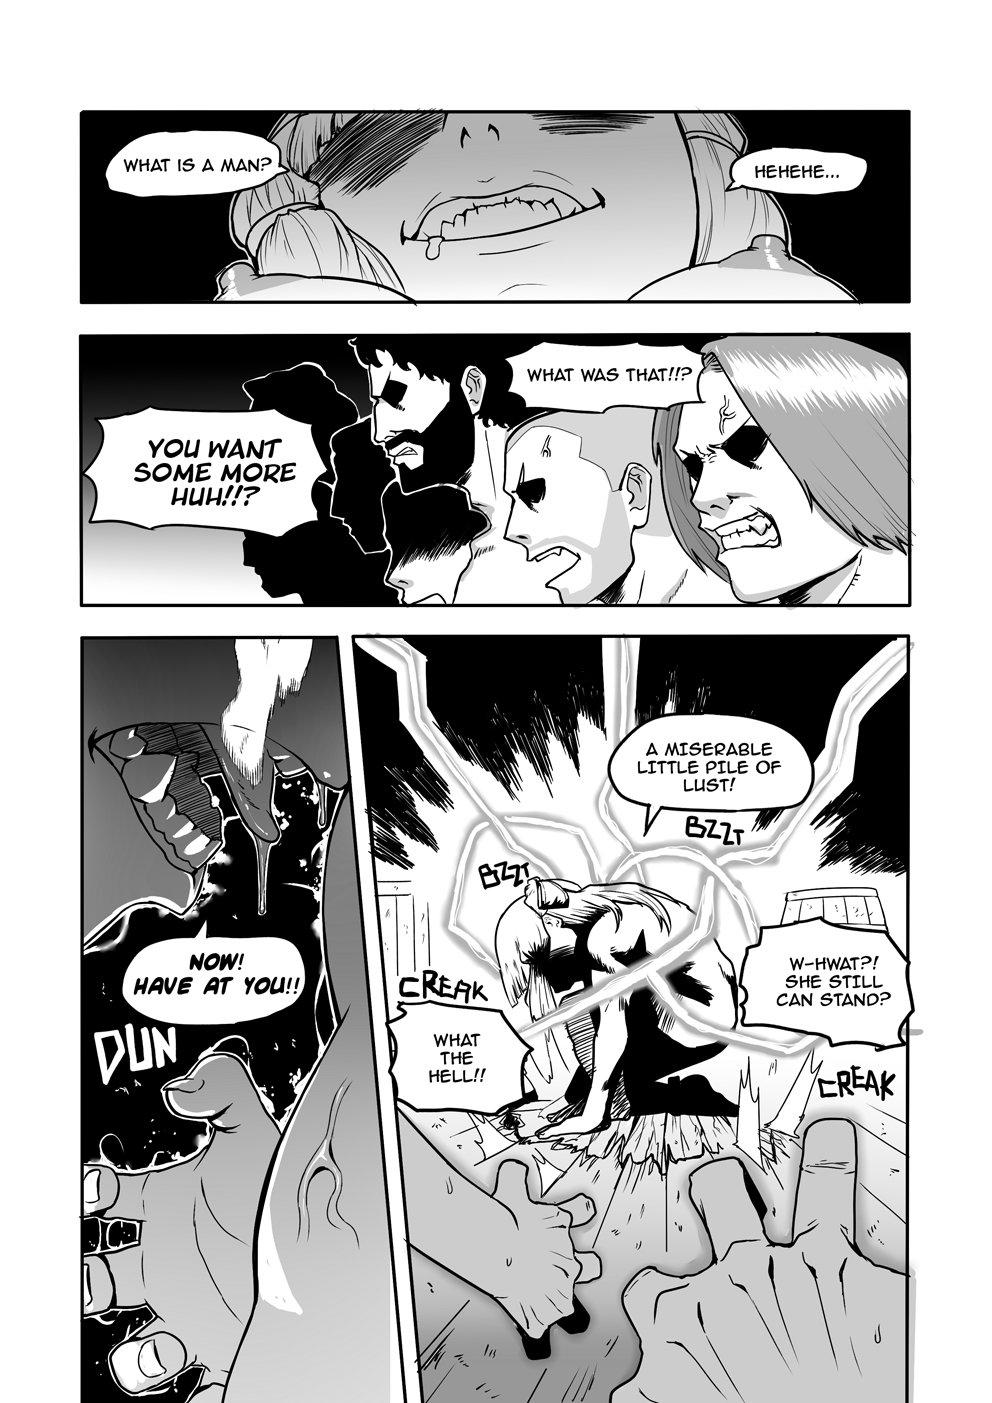 Nasty Death by Snu-Snu - Fate grand order Black Girl - Page 5